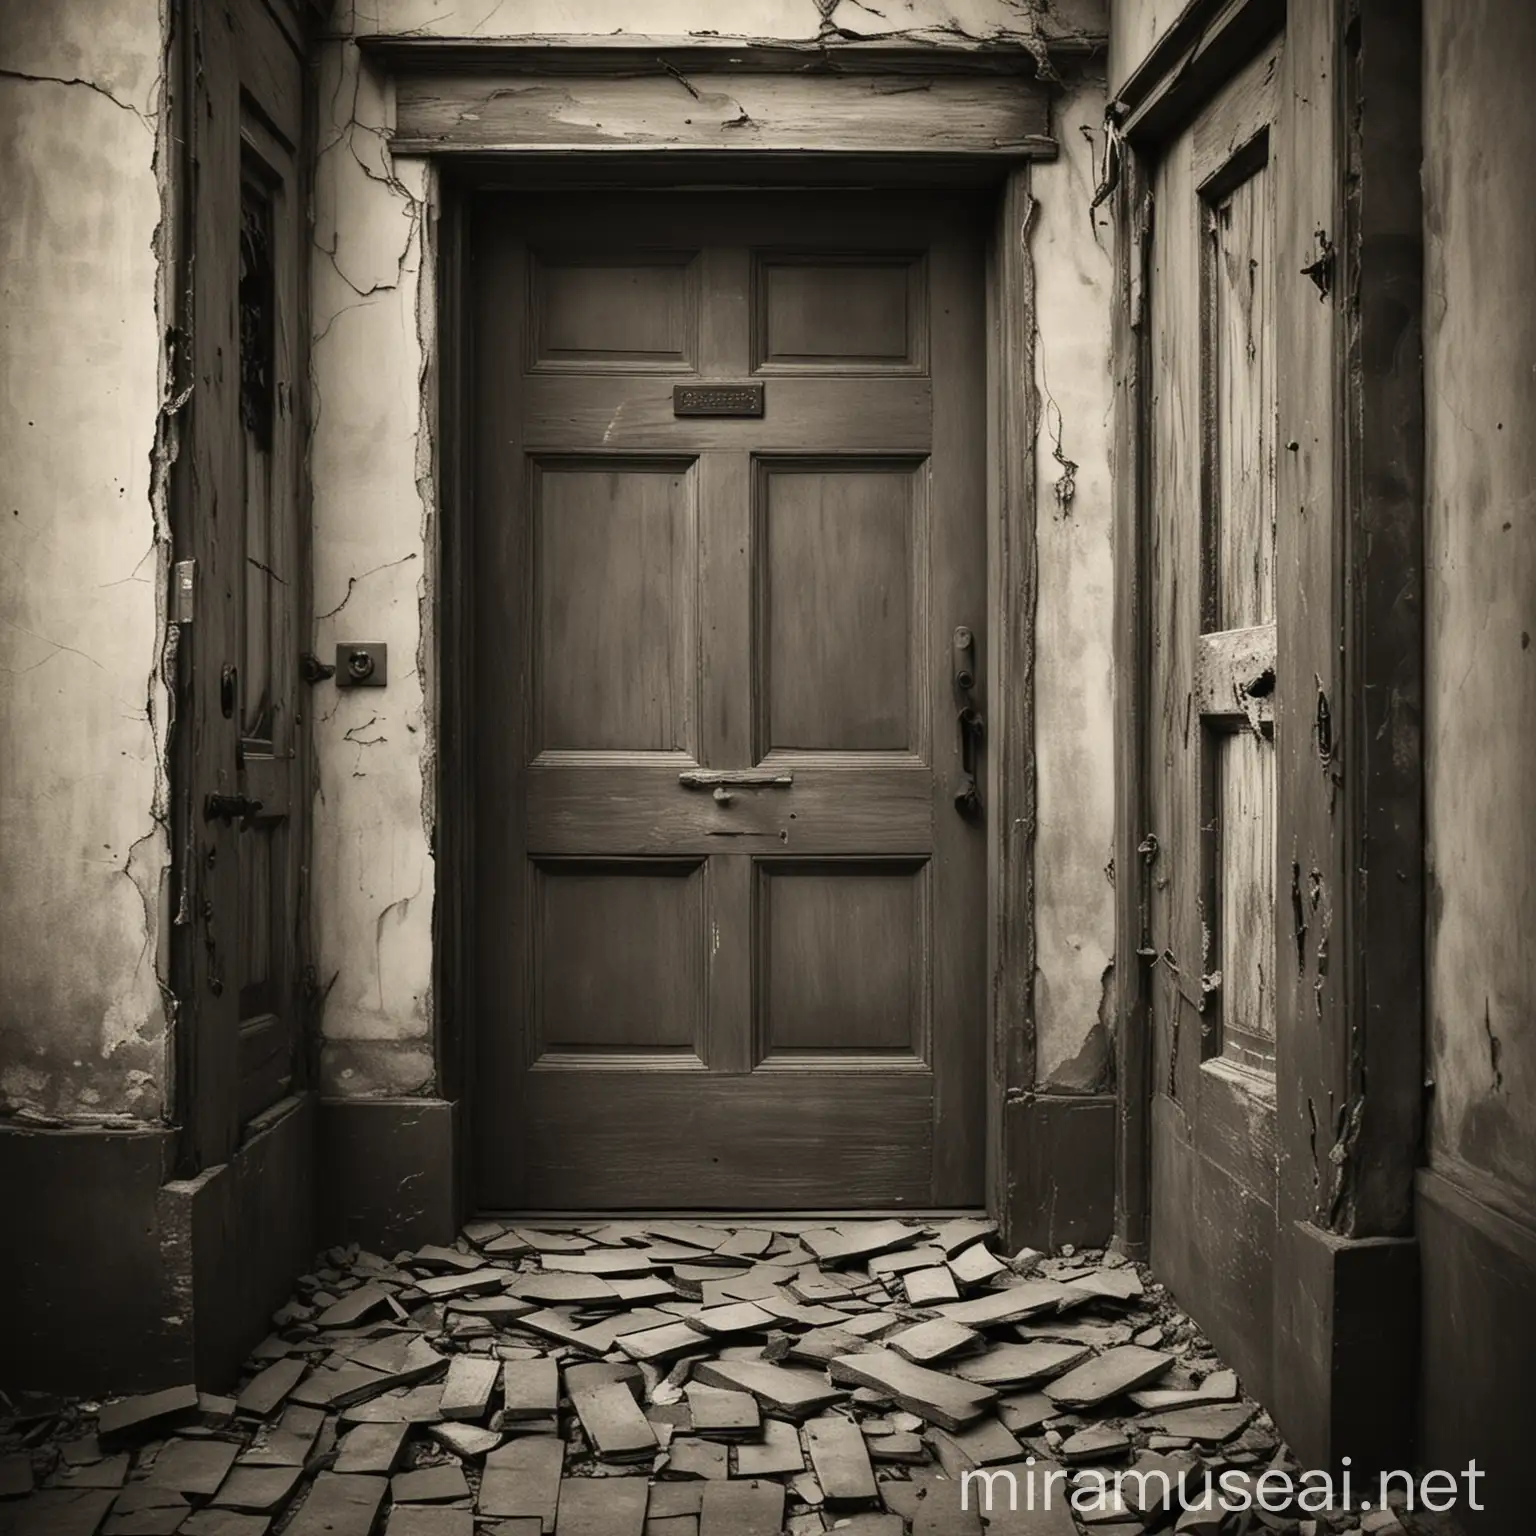 Surrealistic Depiction Poetic Melancholy in Dead Steps Crooked Doors